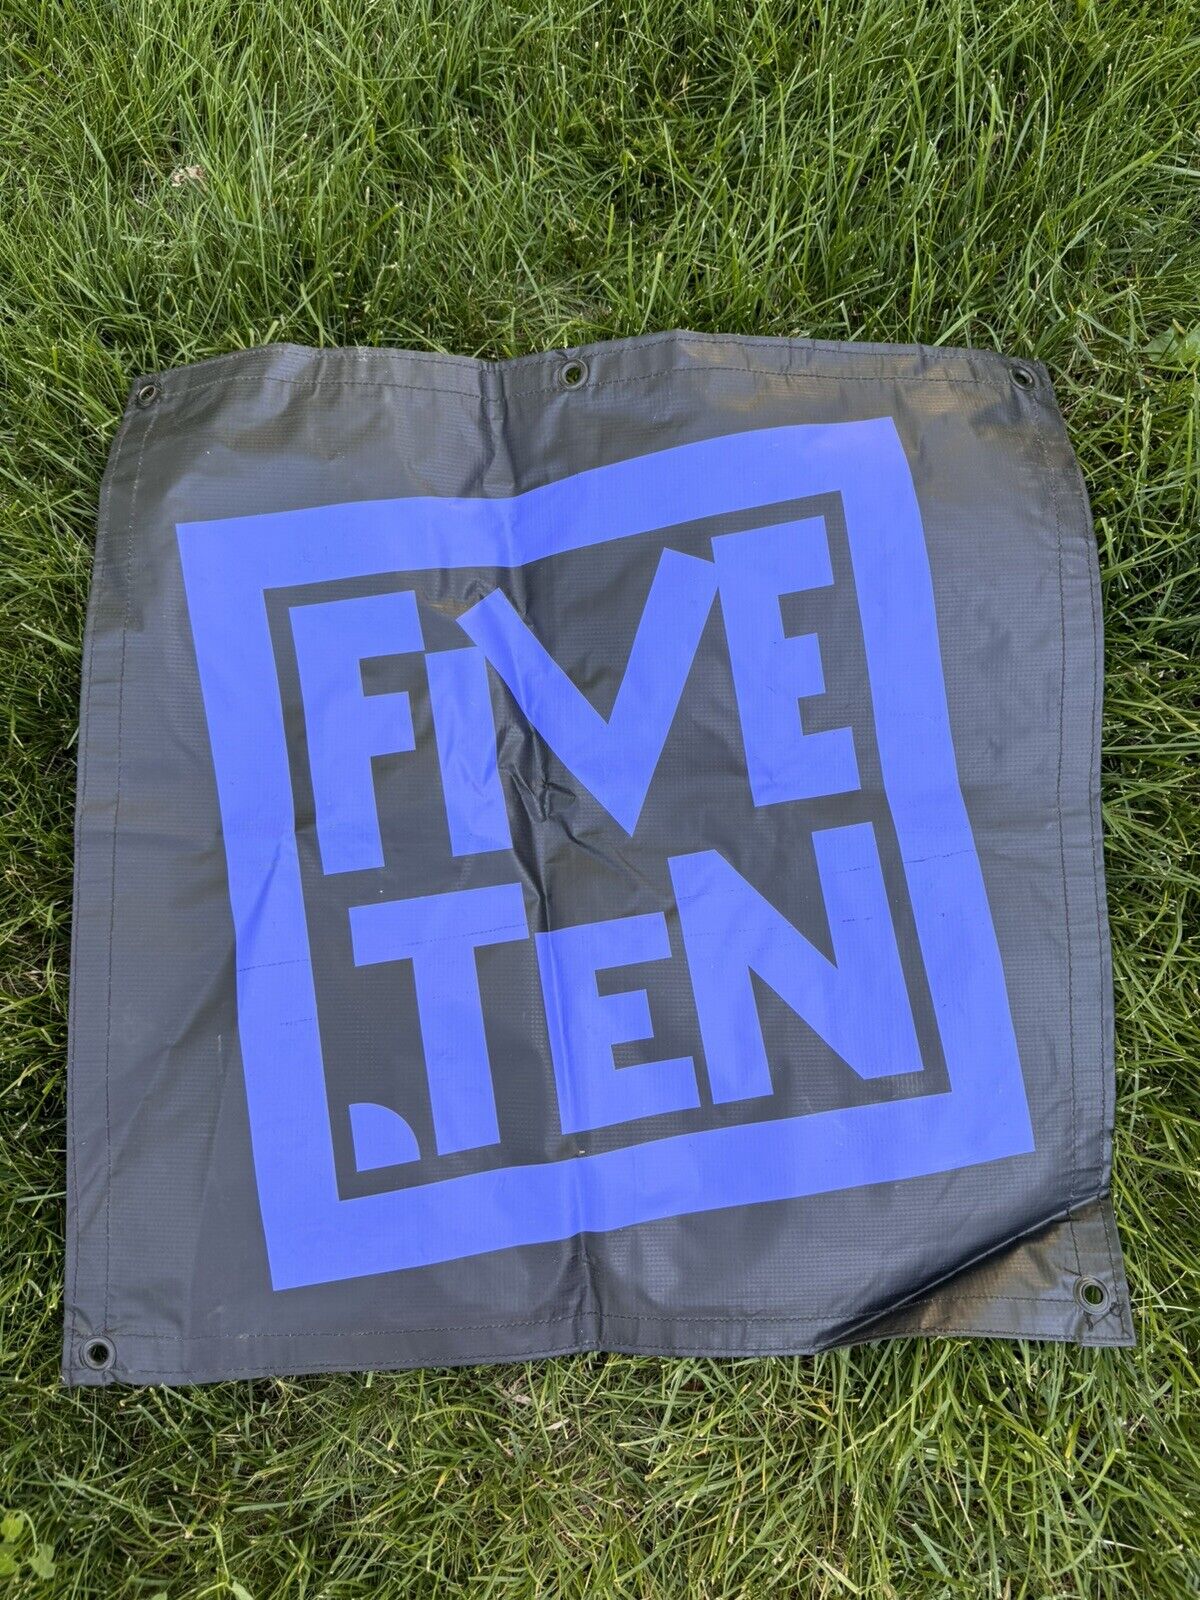 Five Ten Advertising Promotion Banner Poster Roughly 2’ x 2’